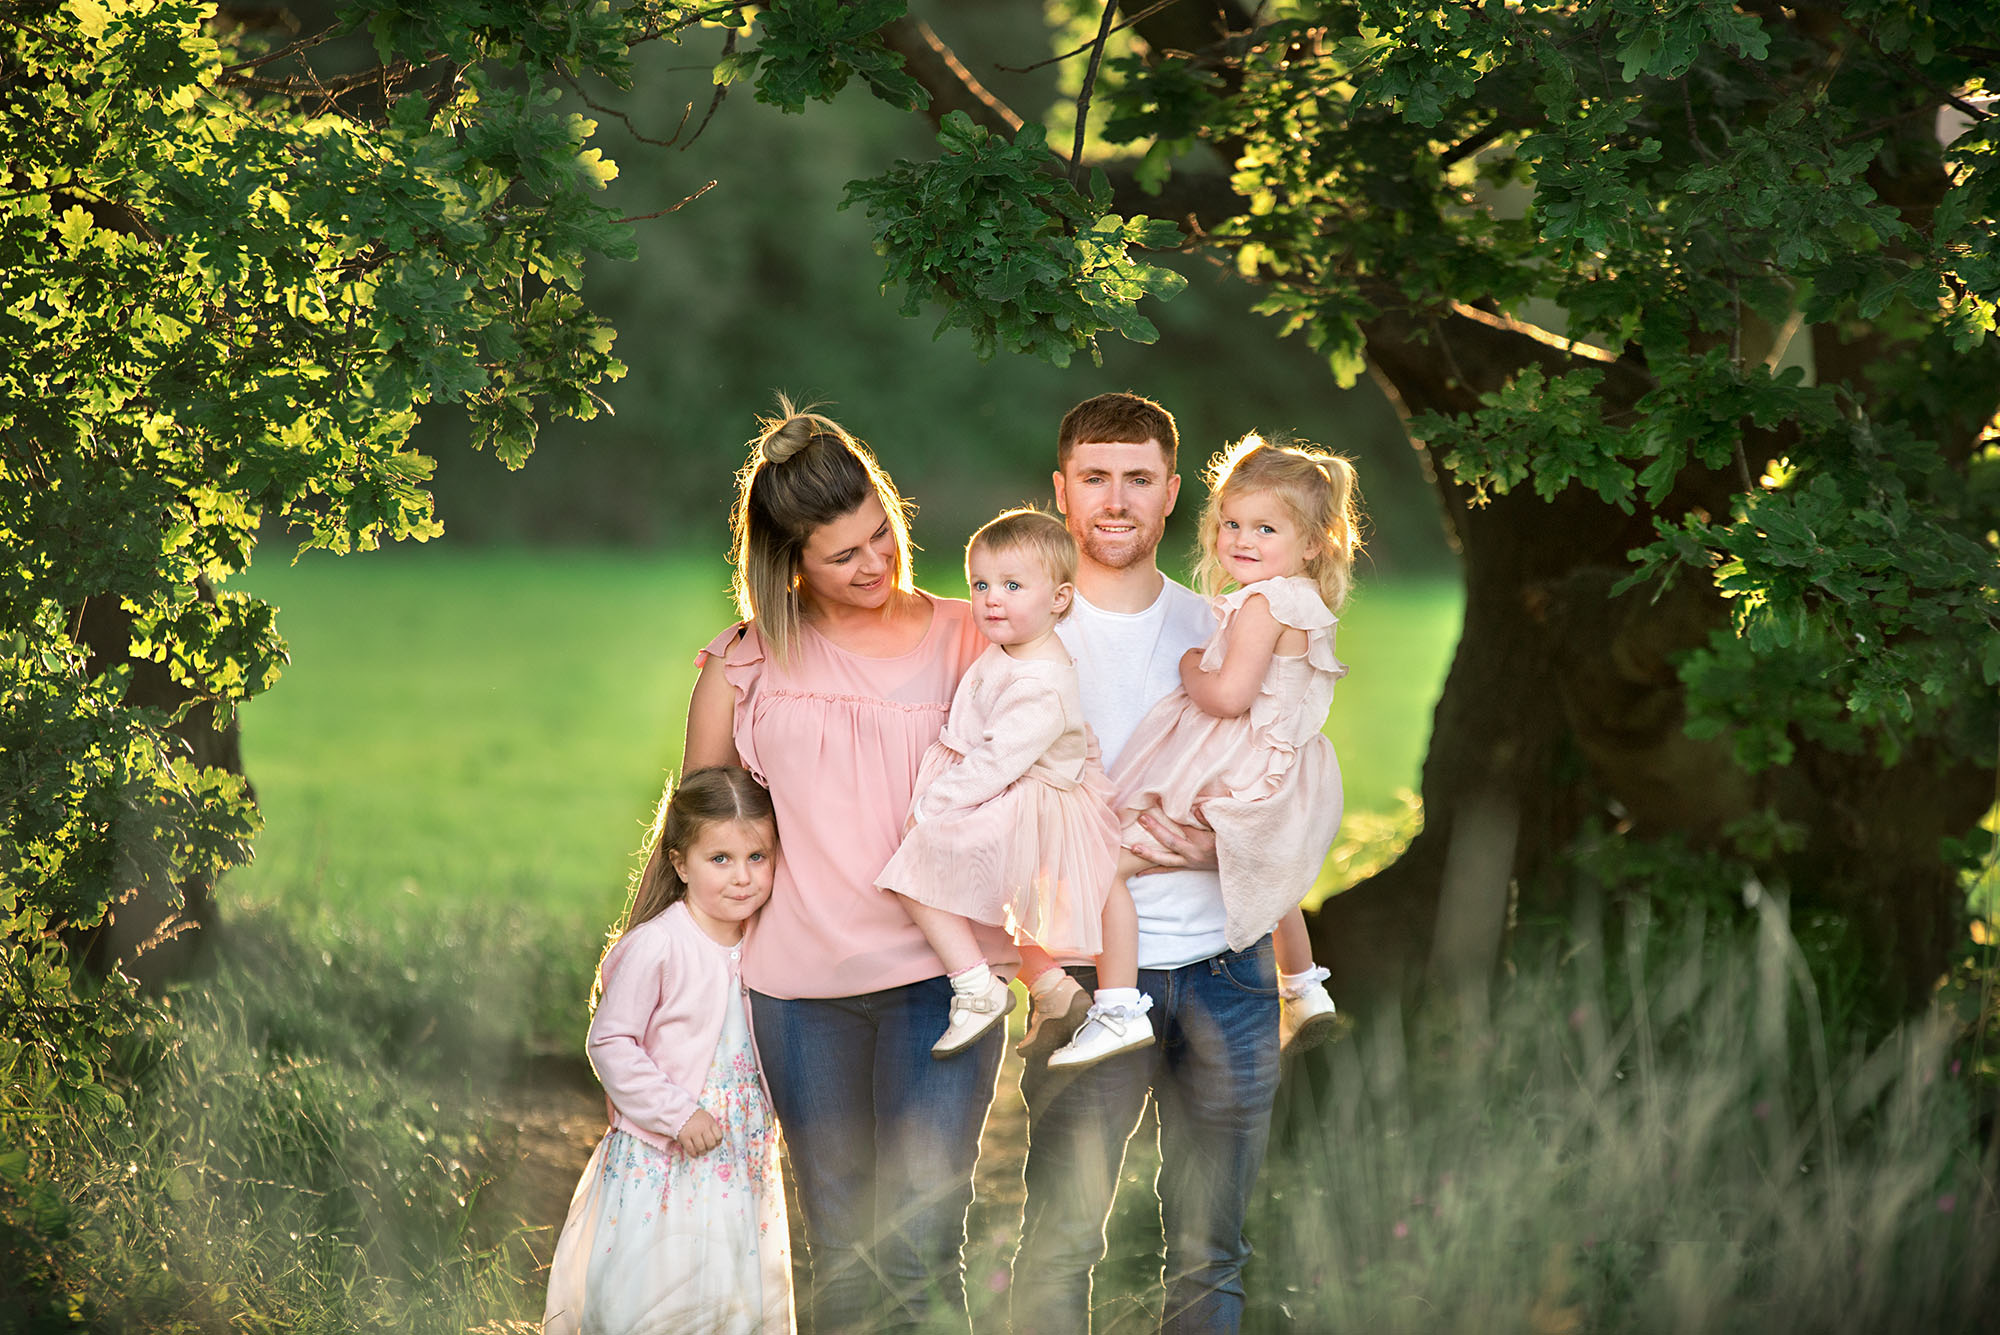 Barnsley photographer taking photos with a family of 5 on a warm summer evening